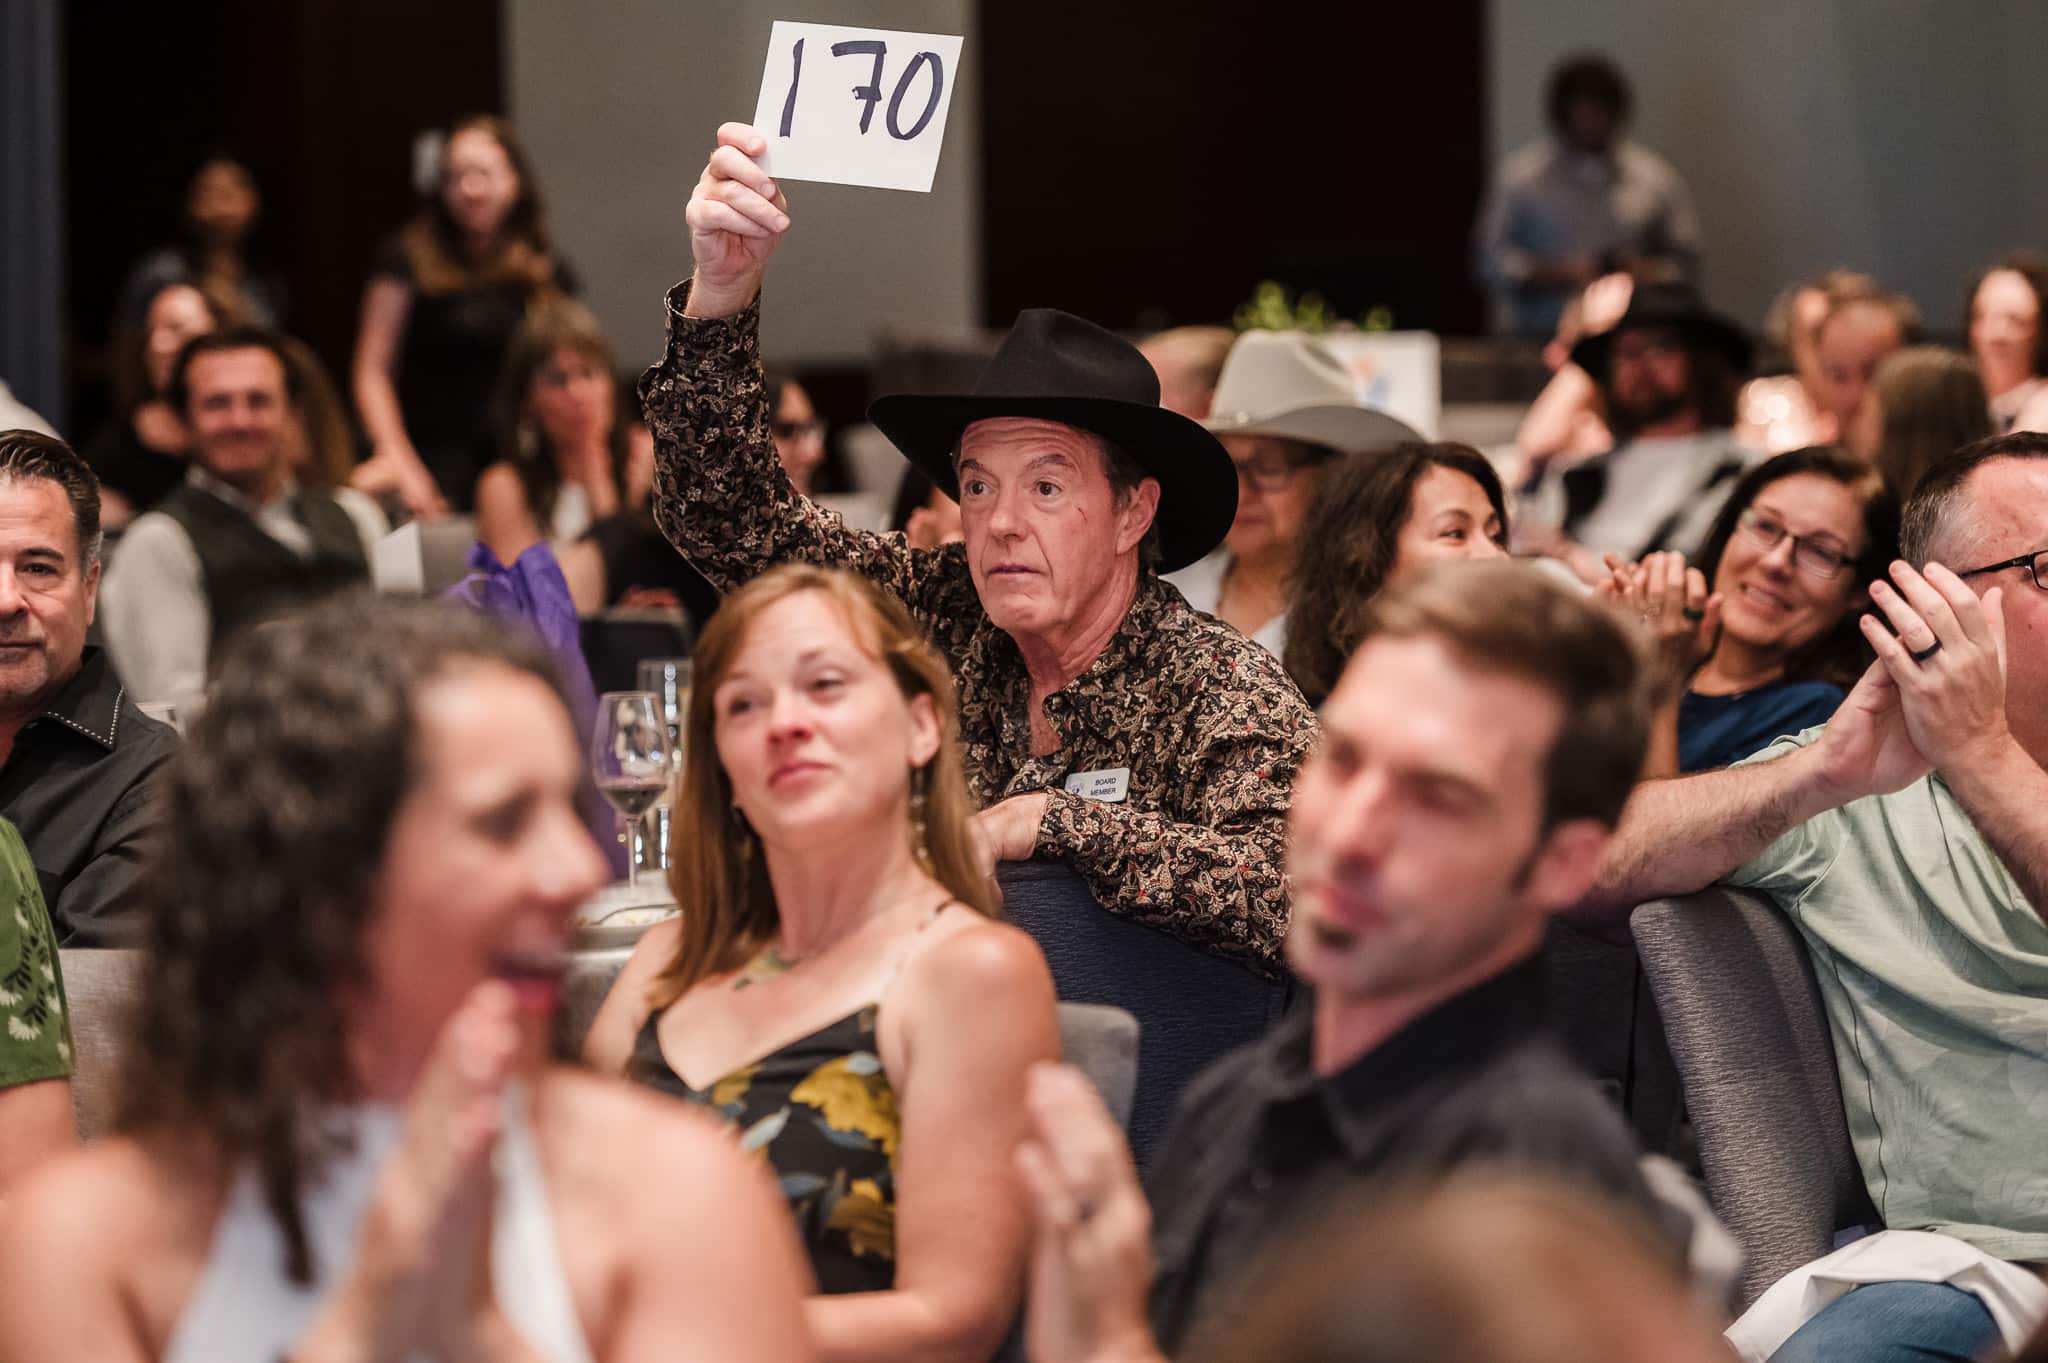 A man in a cowboy hat raises his bidding number during a charity auction fundraiser.